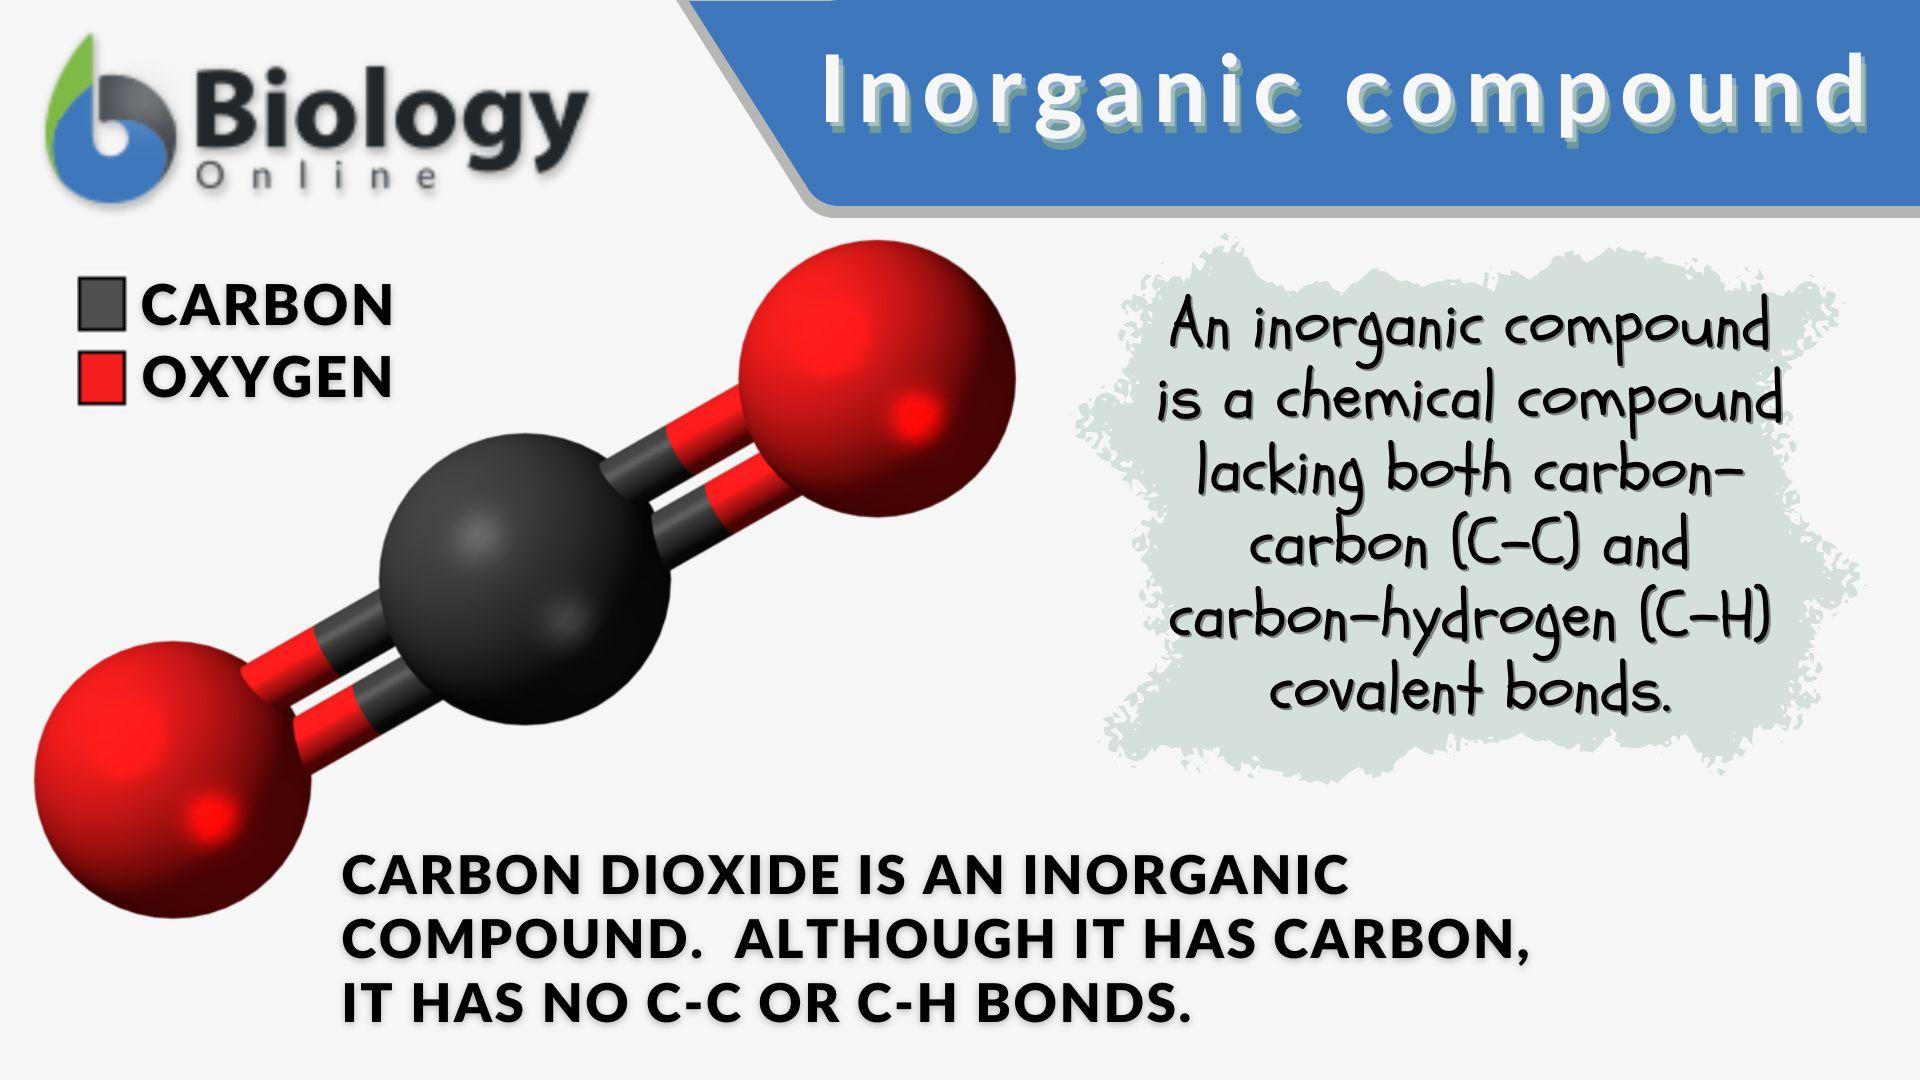 Inorganic compound - Definition and Examples - Biology Online Dictionary